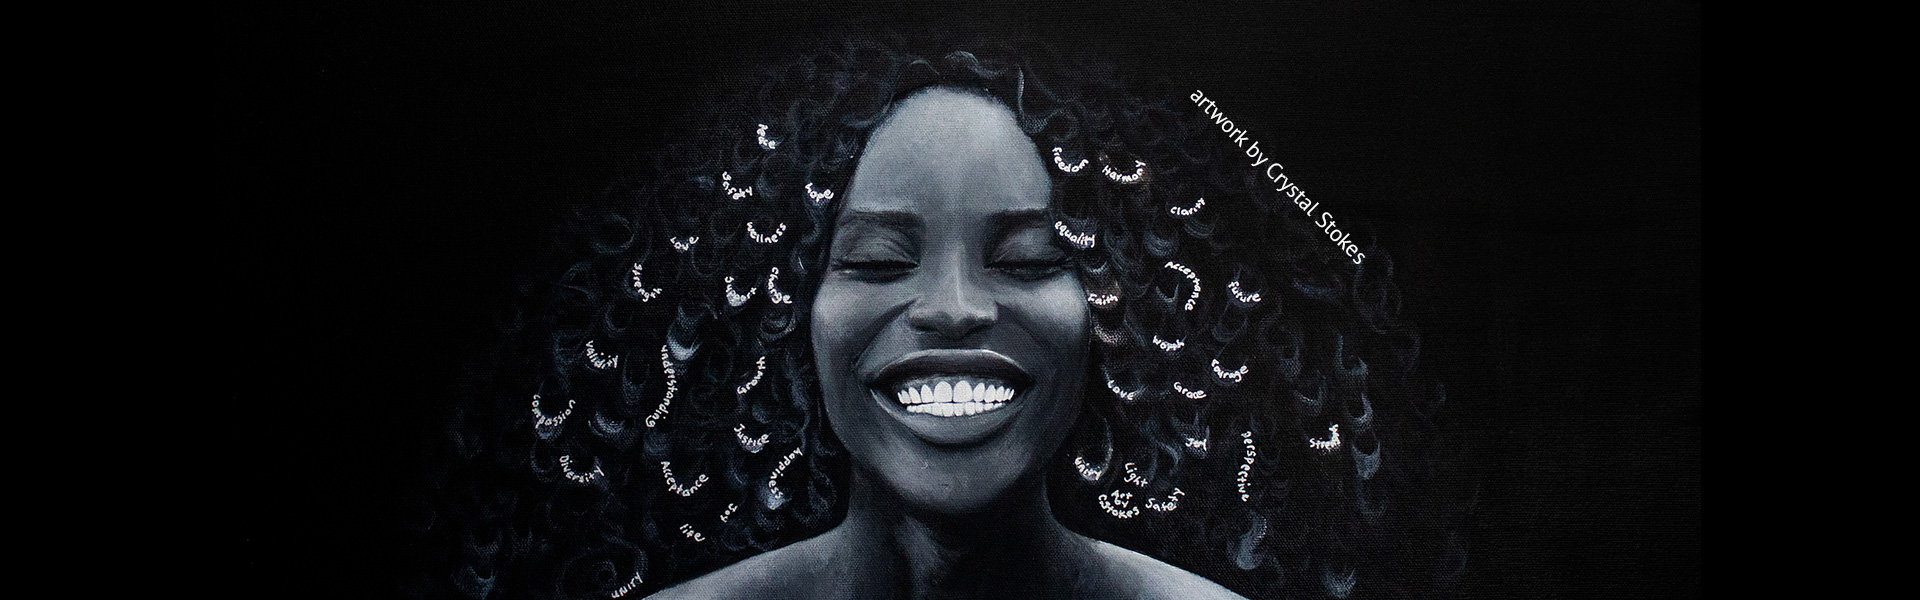 smiling BIPOC woman by Crystal Stokes label image for People Power